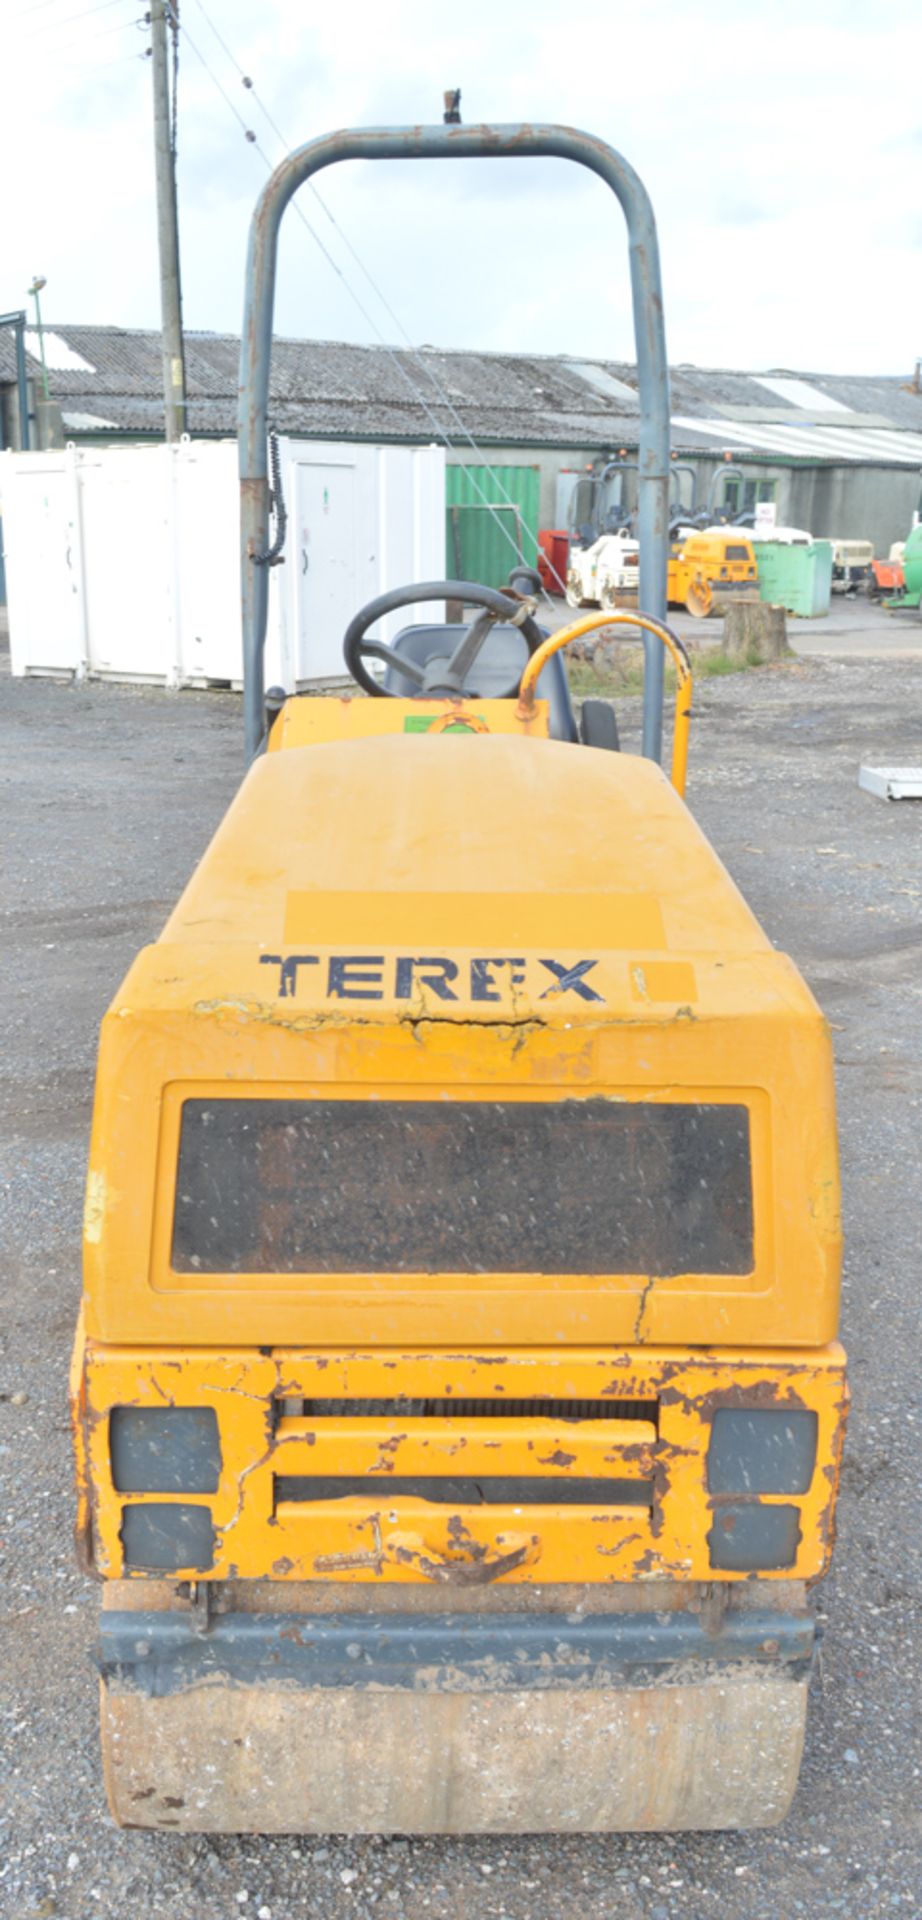 Benford Terex TV800-1 double drum ride on roller Year: 2005 S/N: E501HU008 Recorded Hours: 1470 - Image 7 of 8